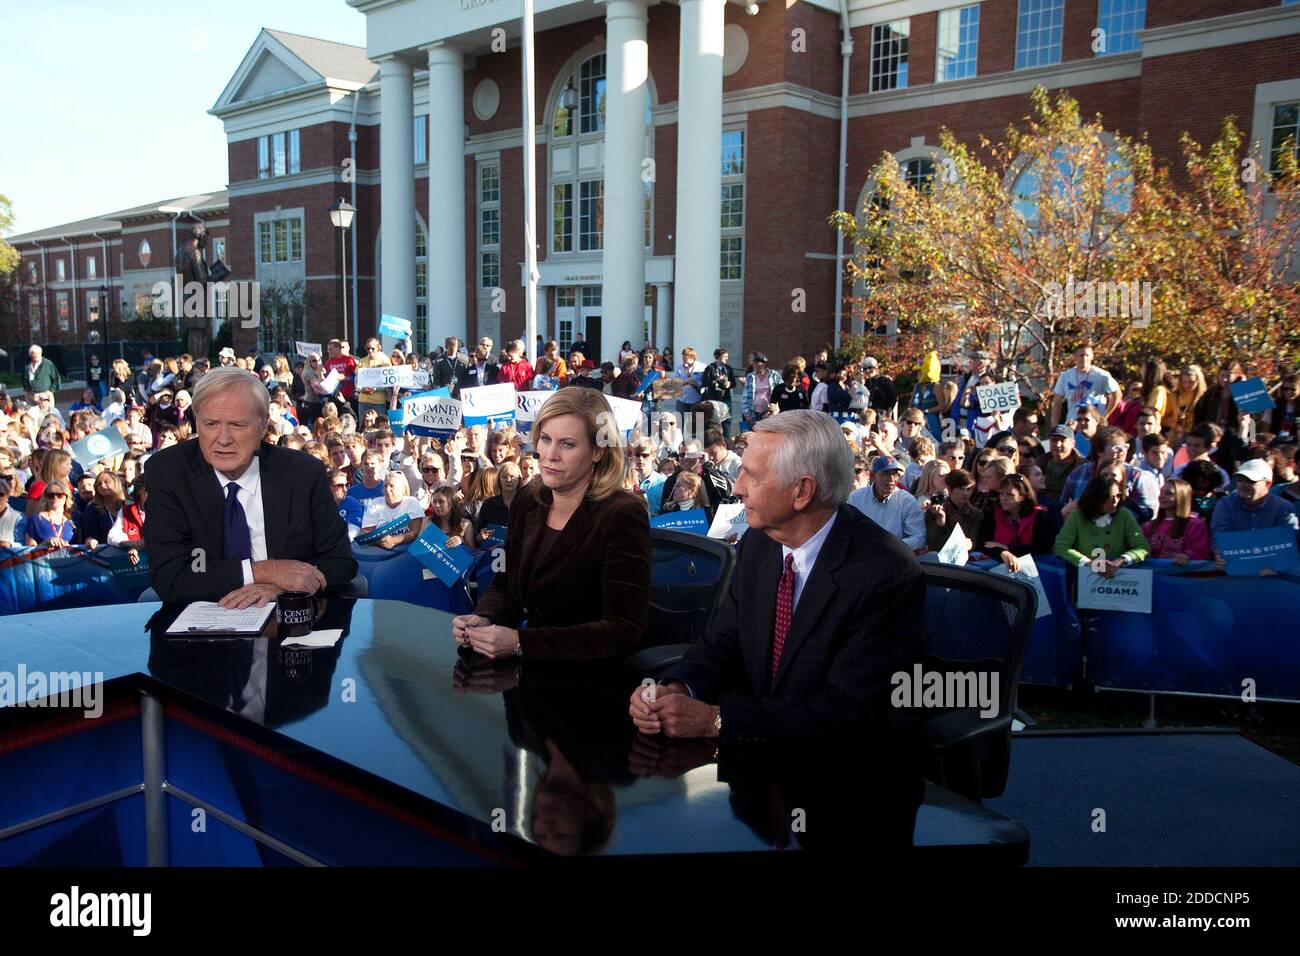 NO FILM, NO VIDEO, NO TV, NO DOCUMENTARY - MSNBC analyst Chris Matthews, left, political consultant Stephanie Cutter and Kentucky Governor Steve Beshear prepare for an interview after a commercial break during a taping of the show 'Hardball with Chris Matthews' on Thursday, October 11, 2012, outside the Vice Presidential Debate at Centre College in Danville, Kentucky. Photo by Jonathan Palmer/Lexington Herald-Leader/MCT/ABACAPRESS.COM Stock Photo